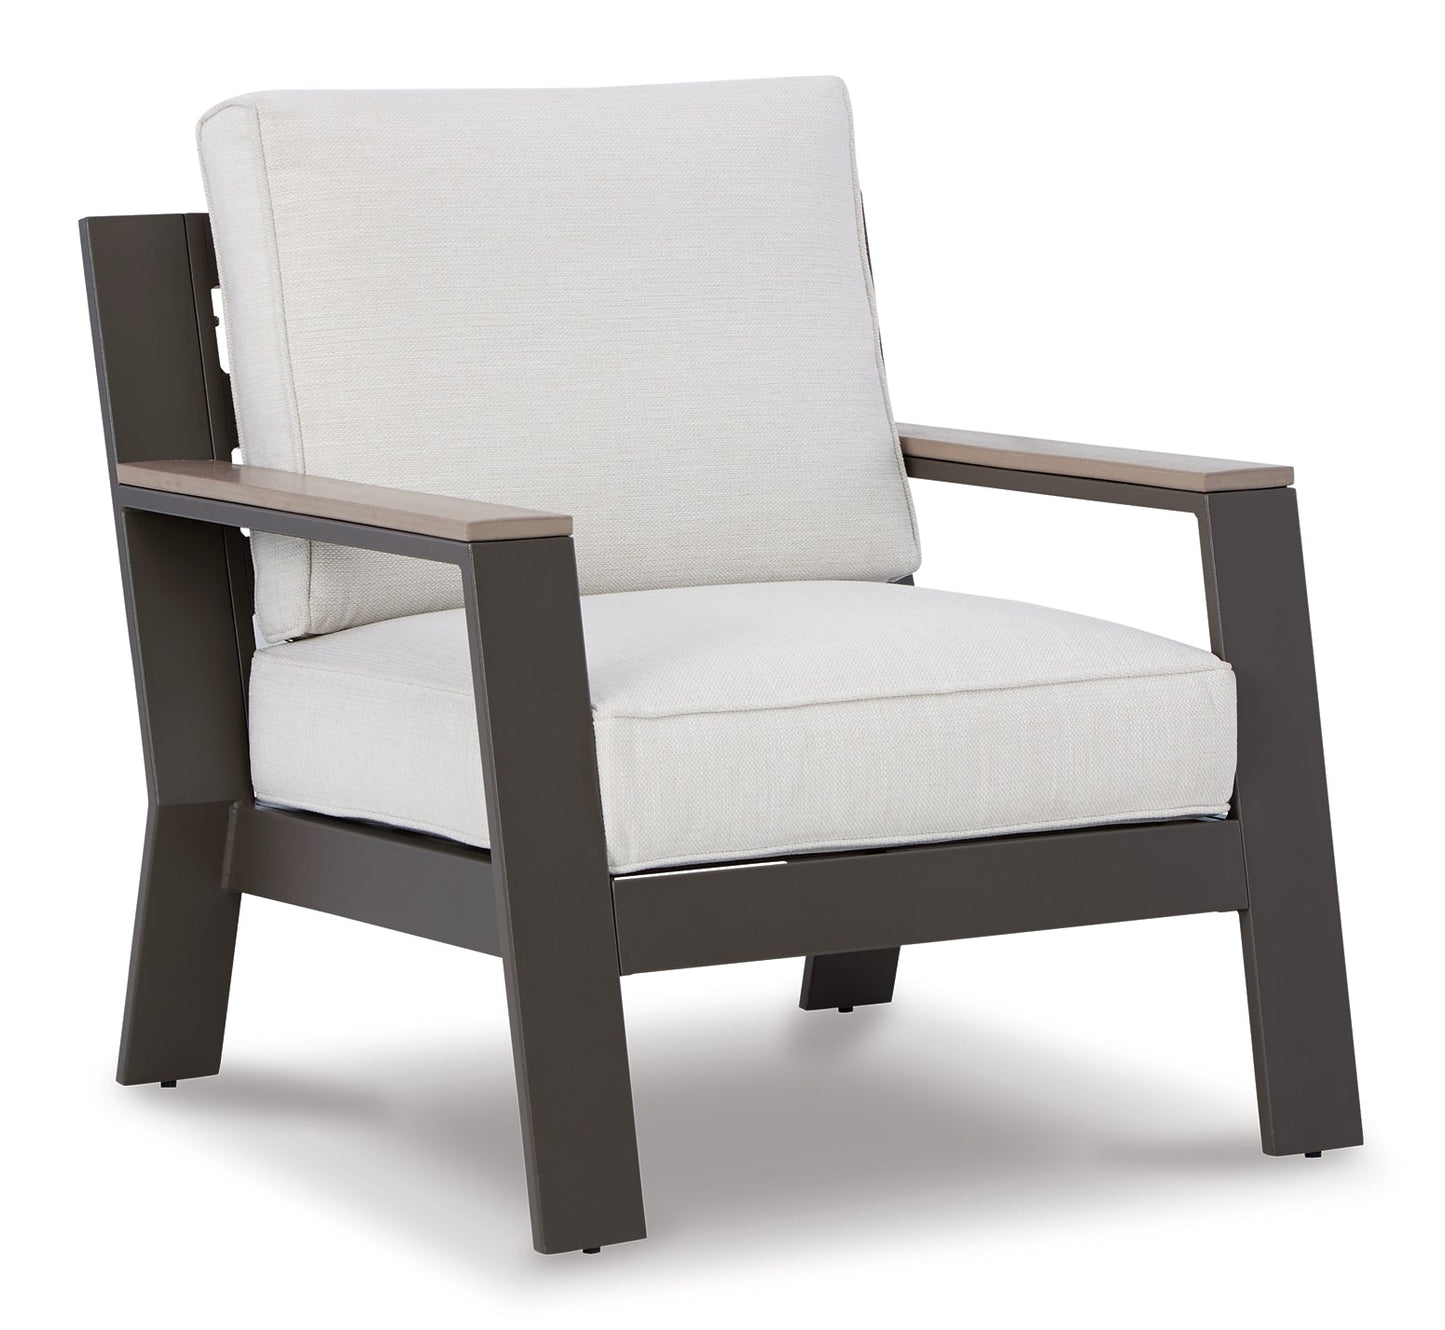 Tropicava Outdoor Loveseat and 2 Lounge Chairs with Coffee Table and 2 End Tables at Walker Mattress and Furniture Locations in Cedar Park and Belton TX.